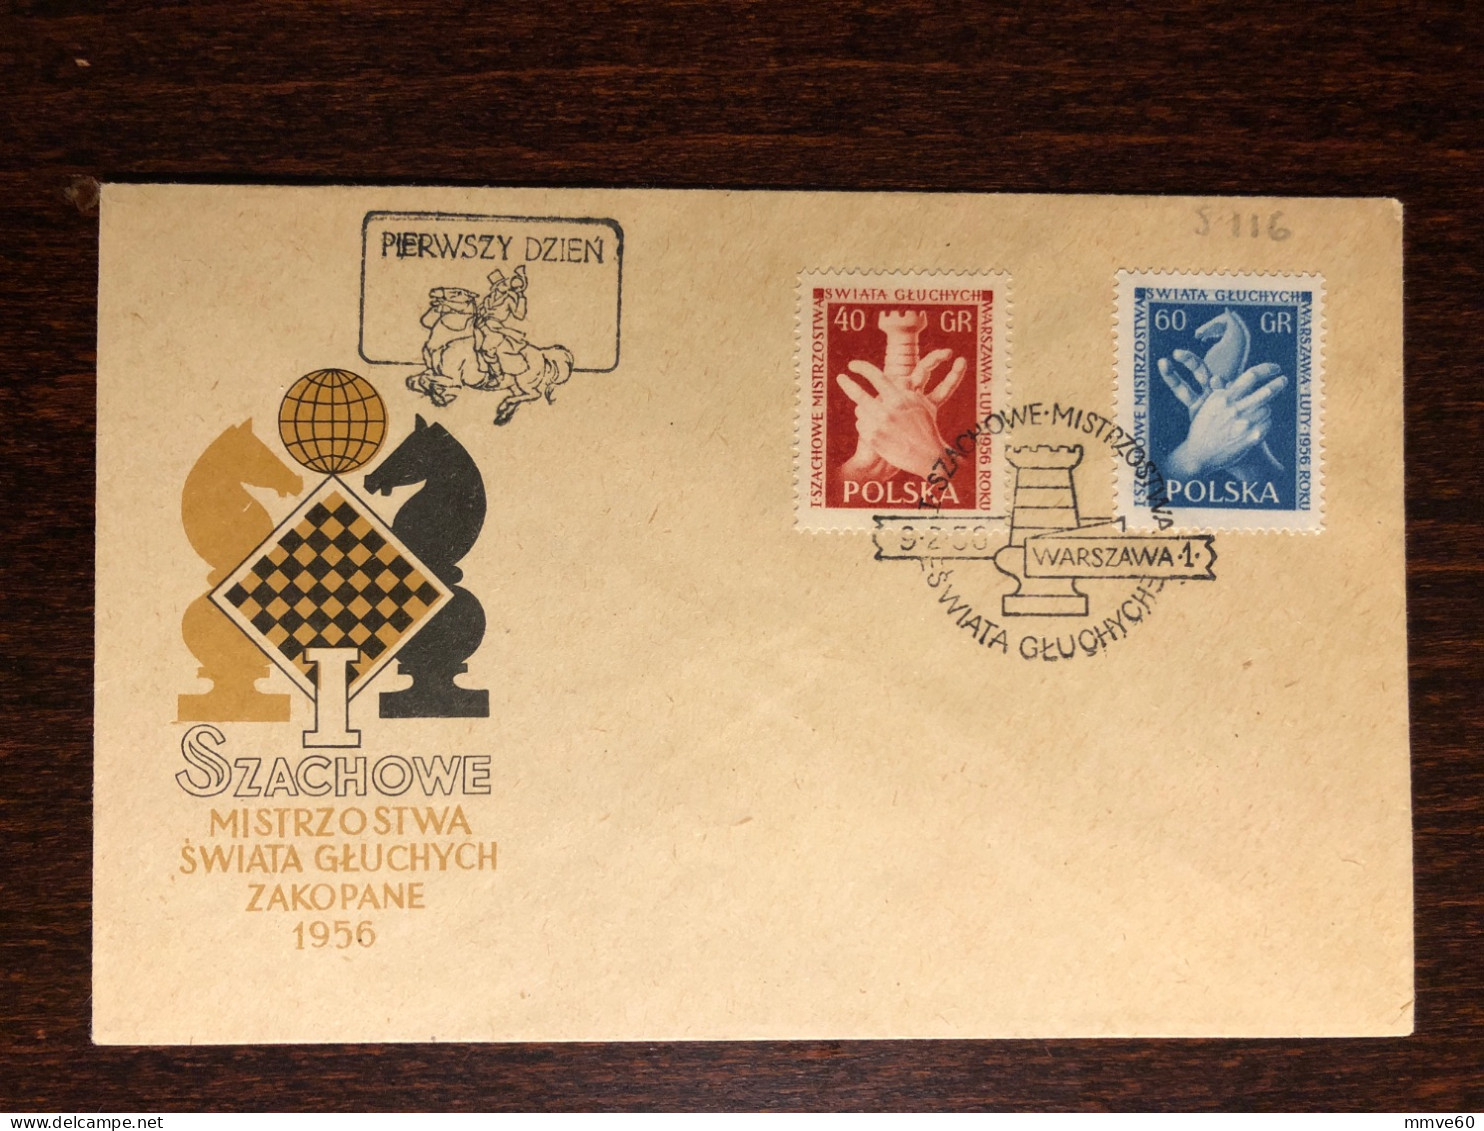 POLAND FDC COVER 1956 YEAR DEAF PEOPLE CHESS HEALTH MEDICINE STAMPS - FDC